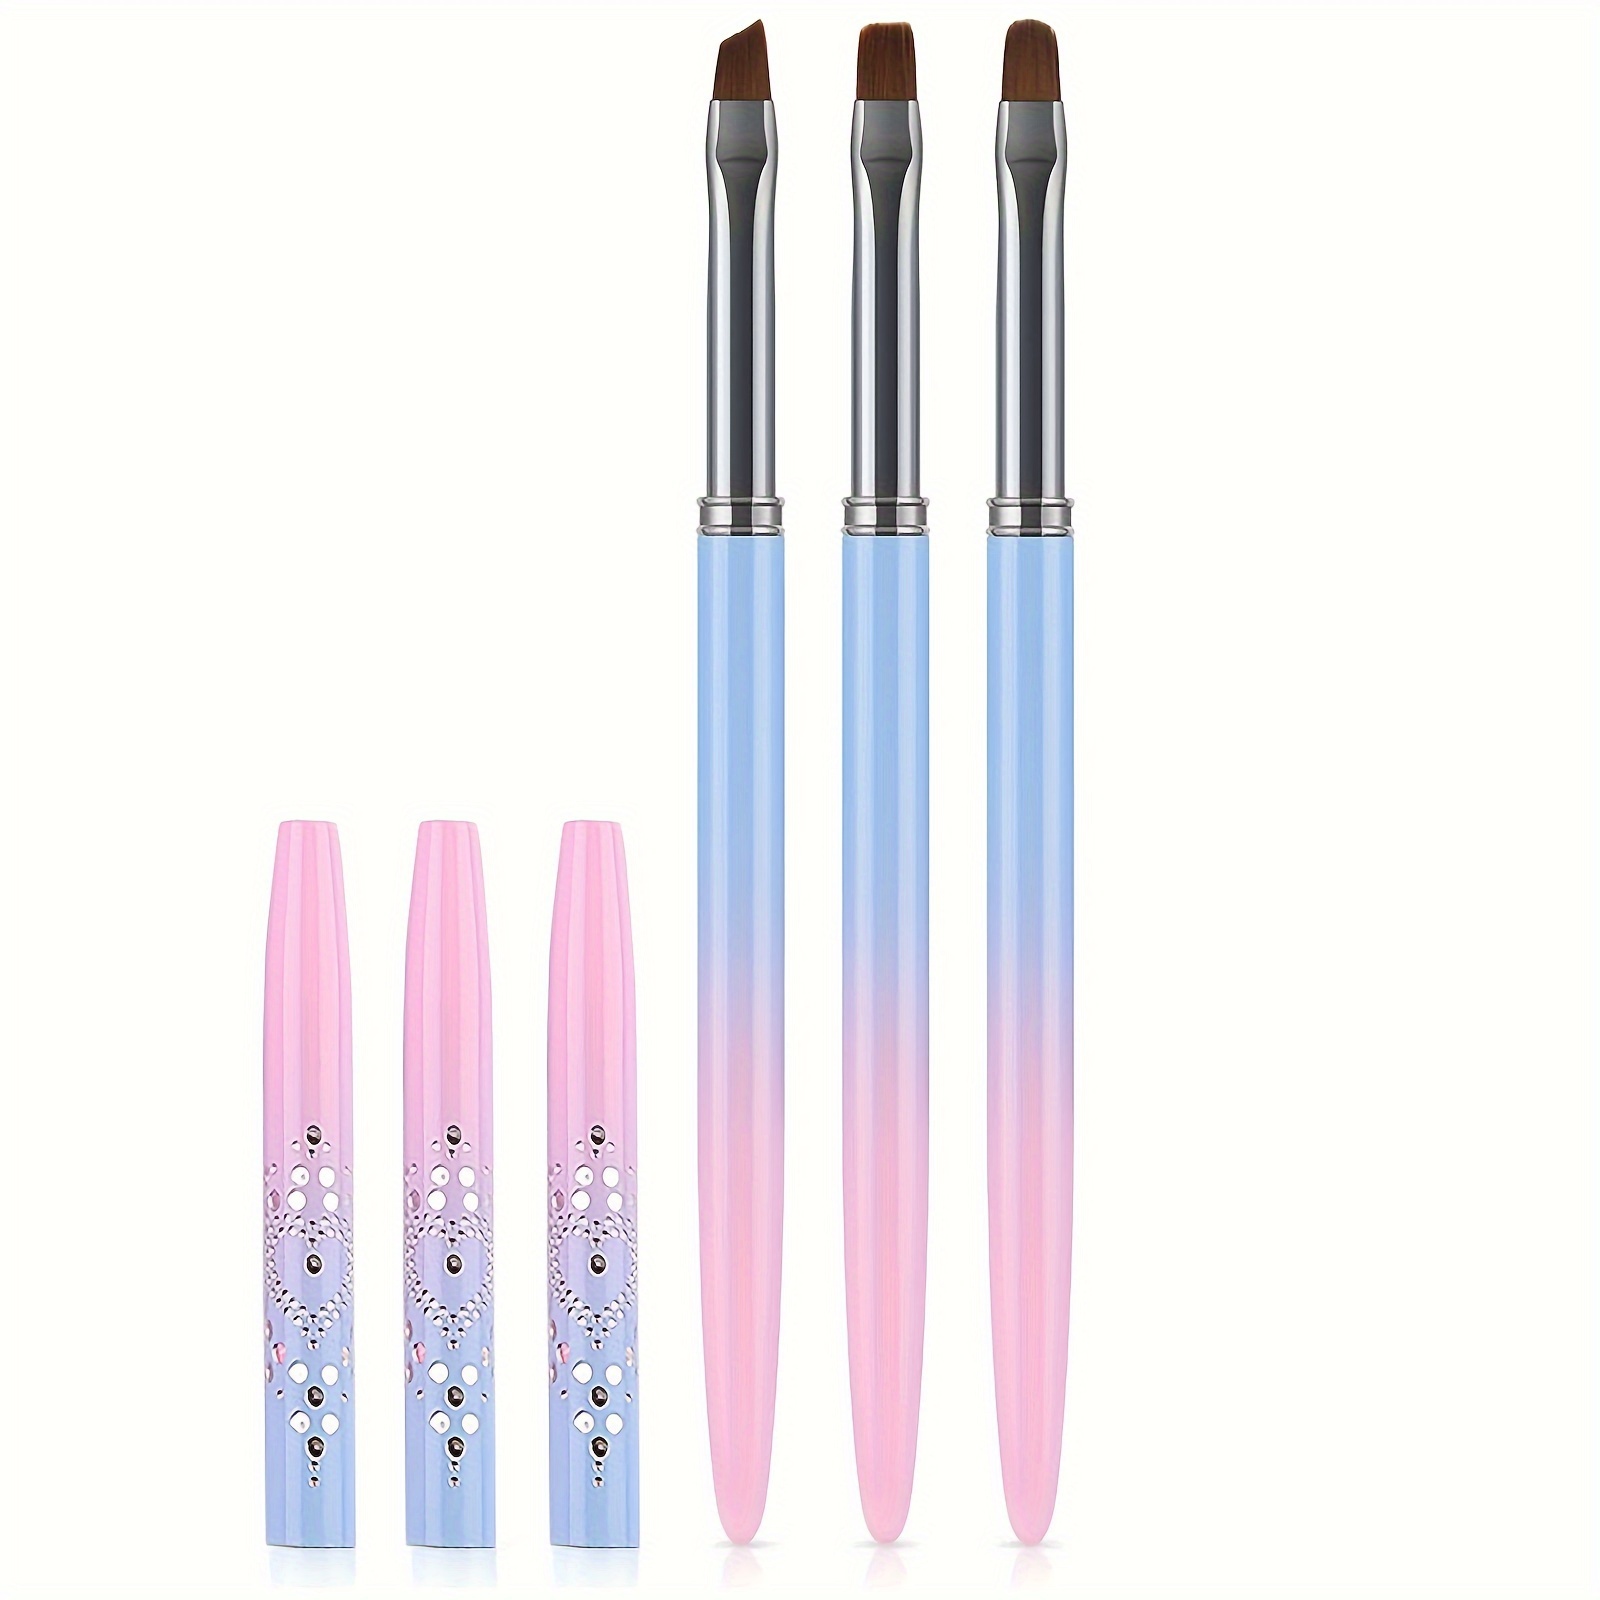 Nail Art Brush Cleaner Cup Immersion Brush Cleaning Bottle Nail Wash Pen  Holder Nail Brush Cleaning Cup with Multiple Size Slots.